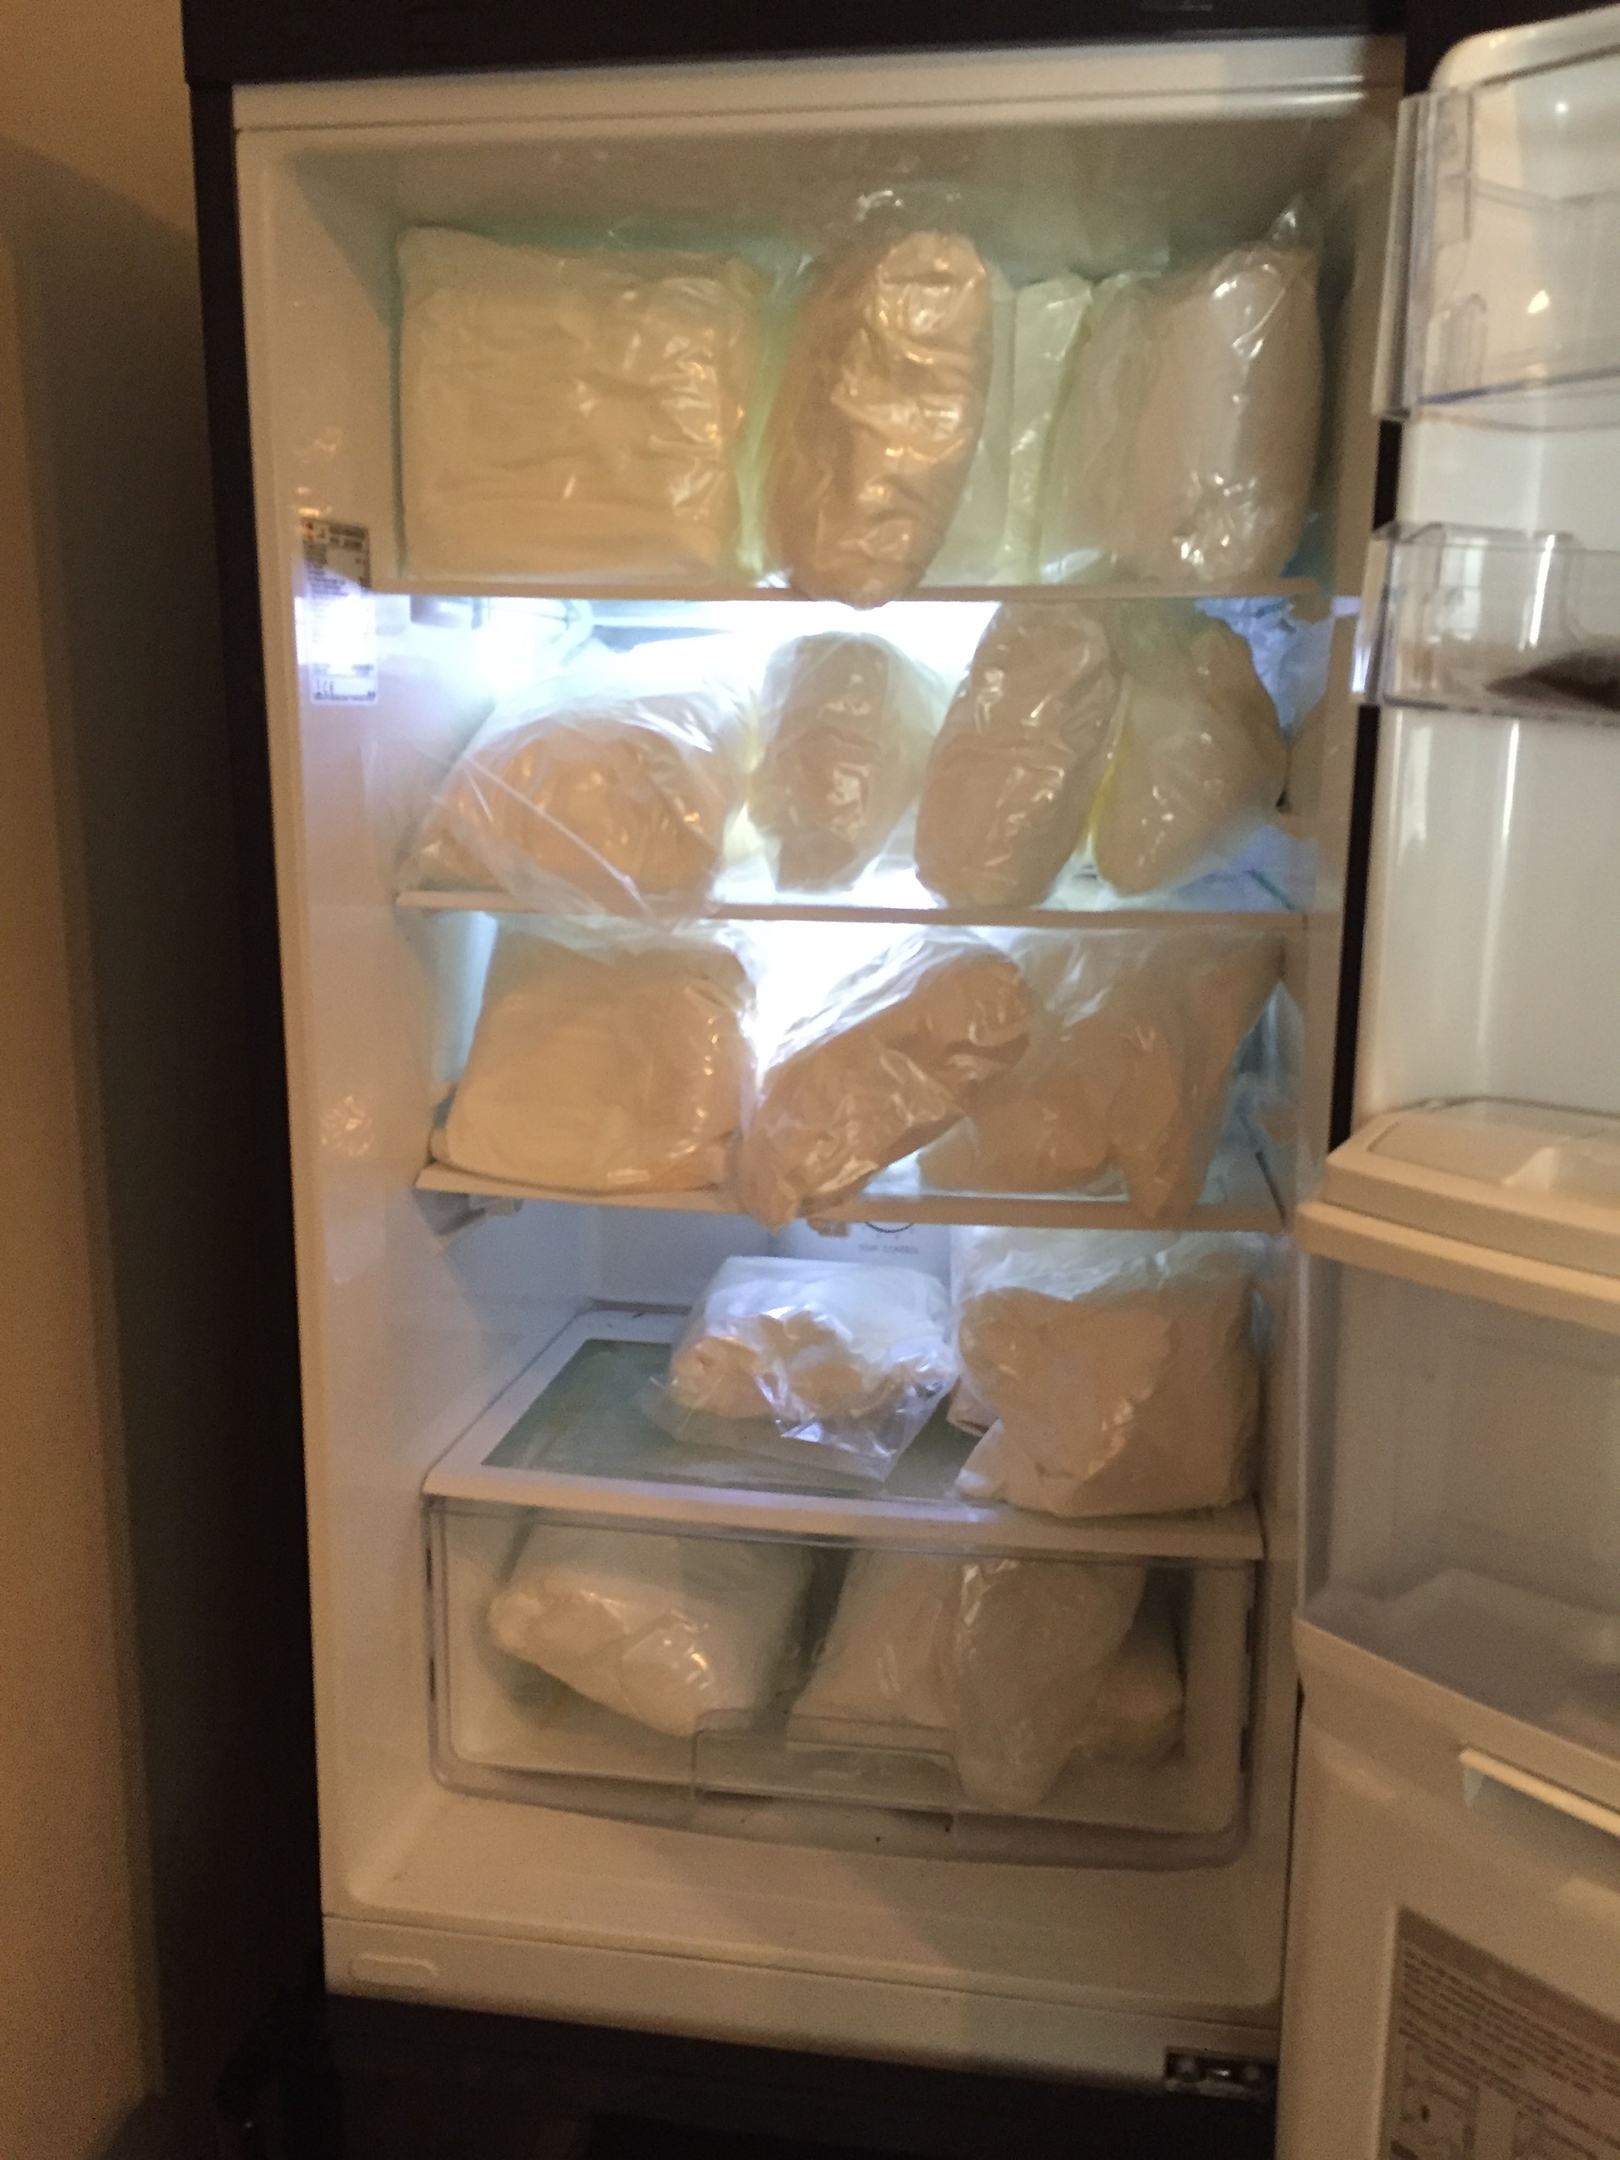 The freezer full of drugs discovered in a Liverpool flat